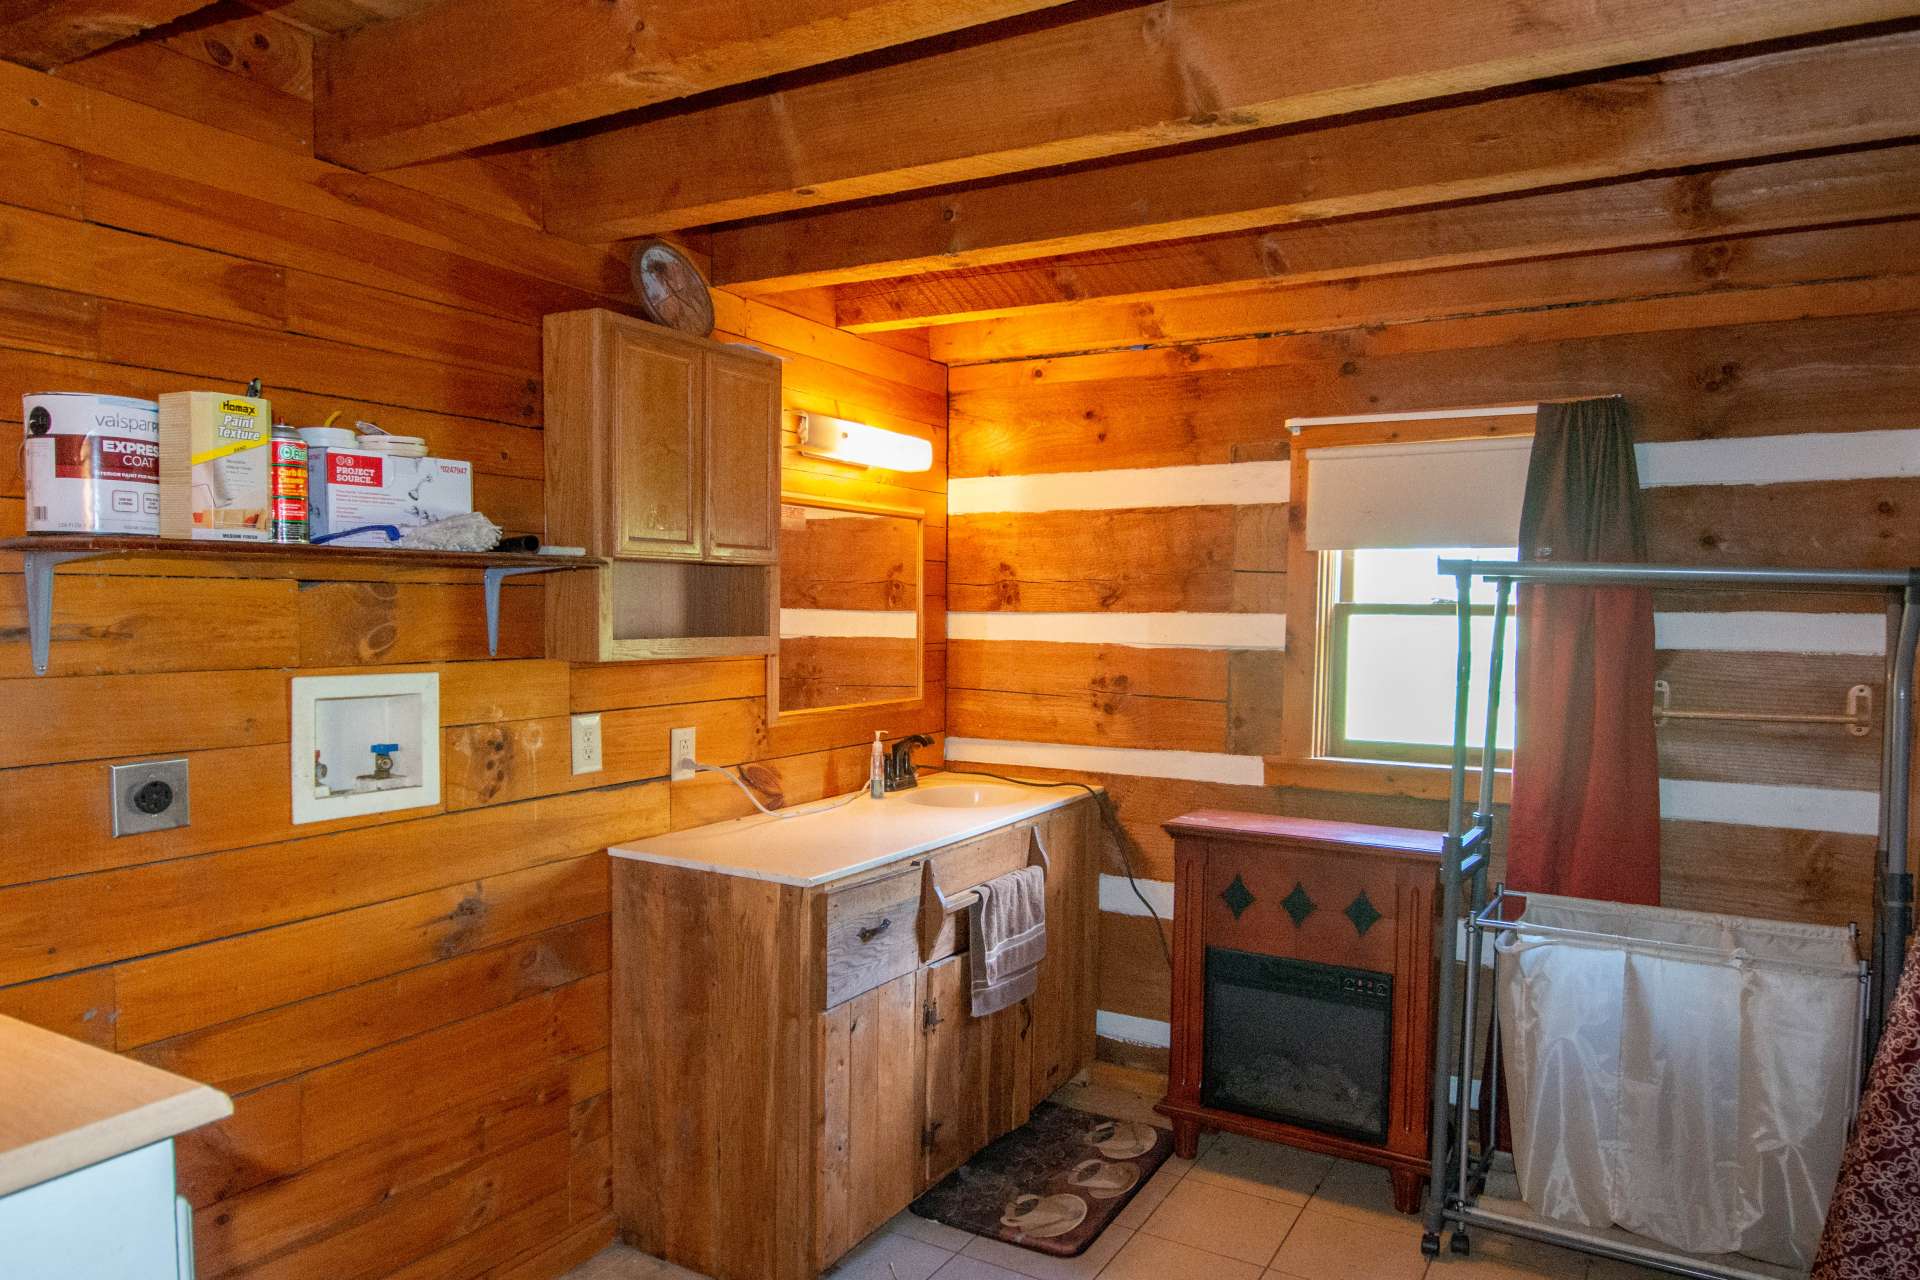 The bath is spacious and includes the laundry area.